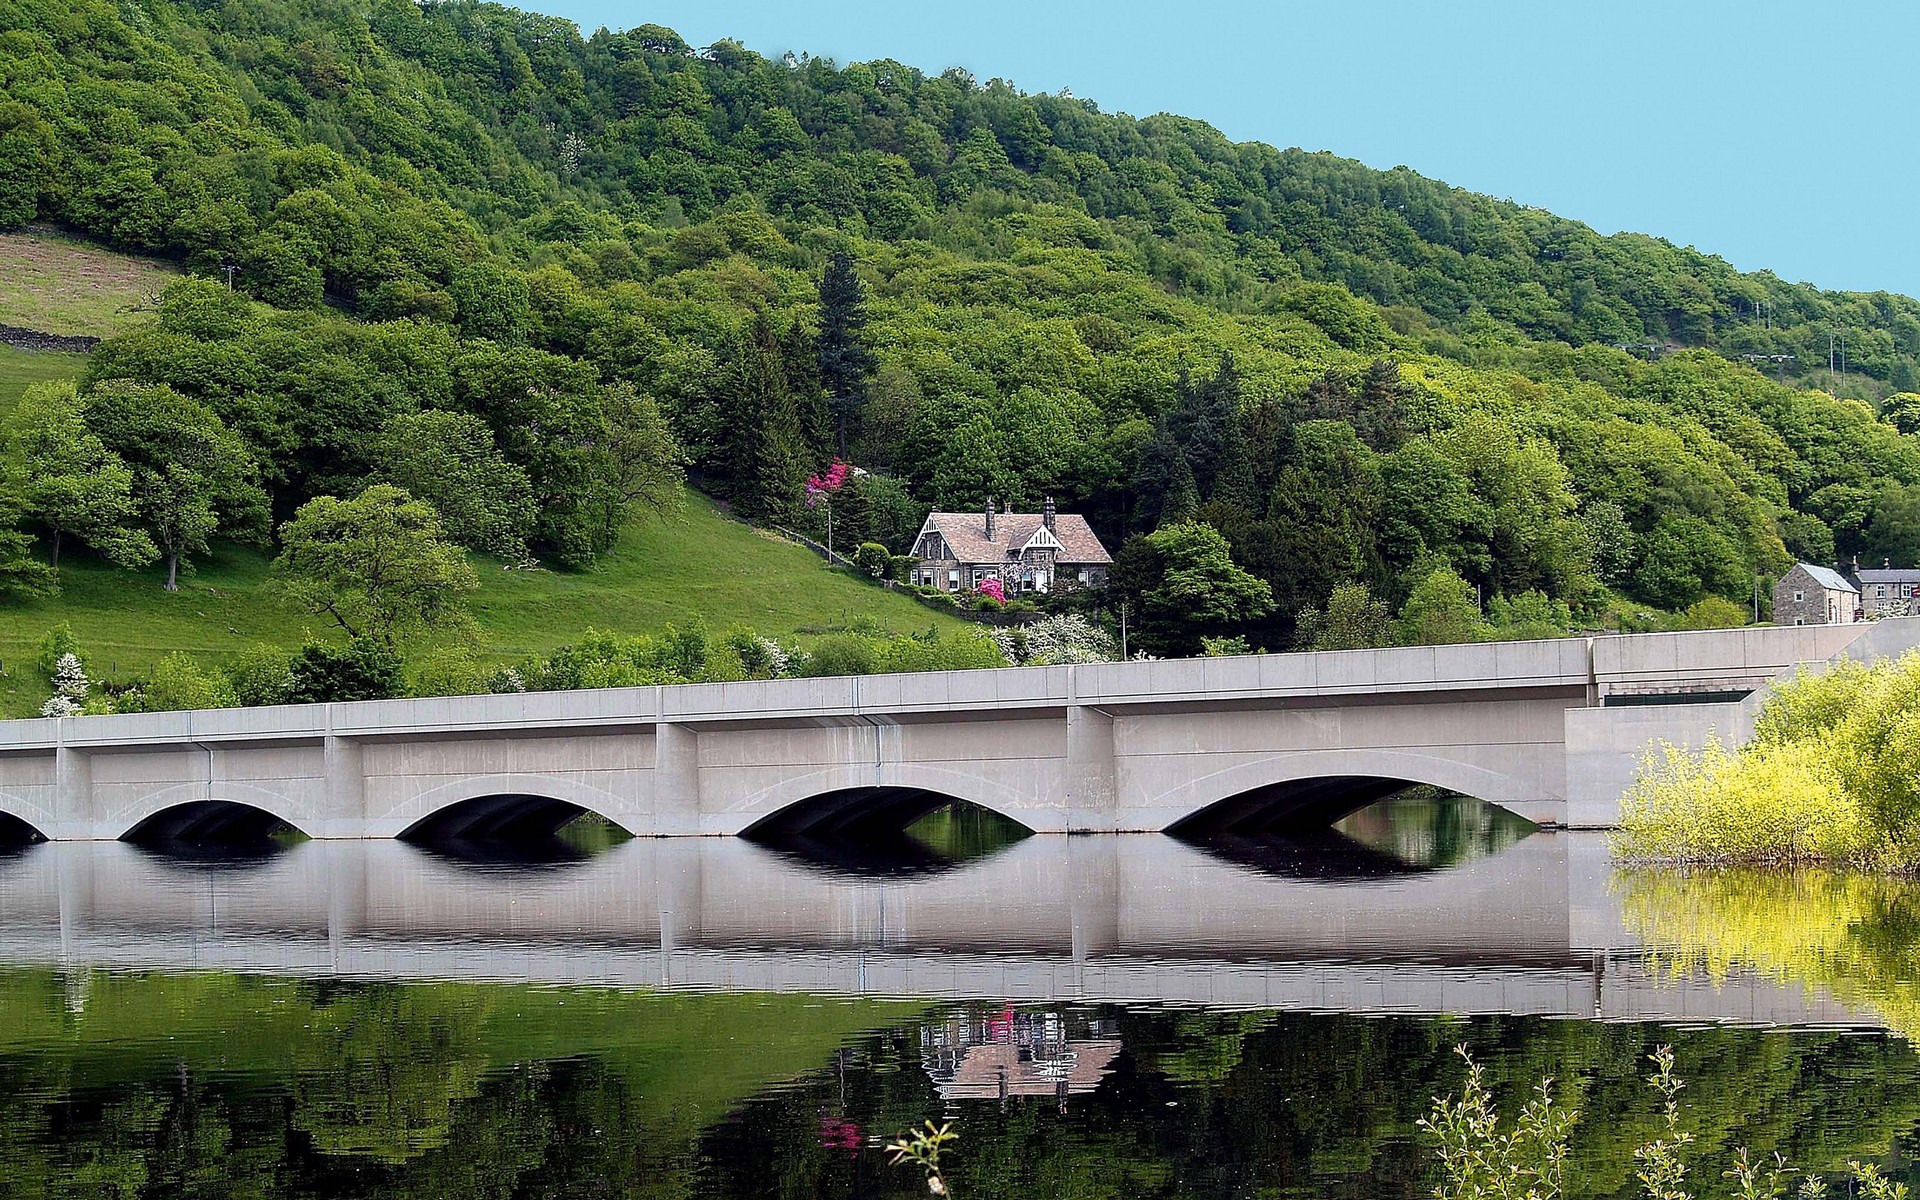 hill, sky, wood, man made, bridge, concrete, field, forest, house, lake, landscape, mountain, photography, reflection, river, tree, water, bridges